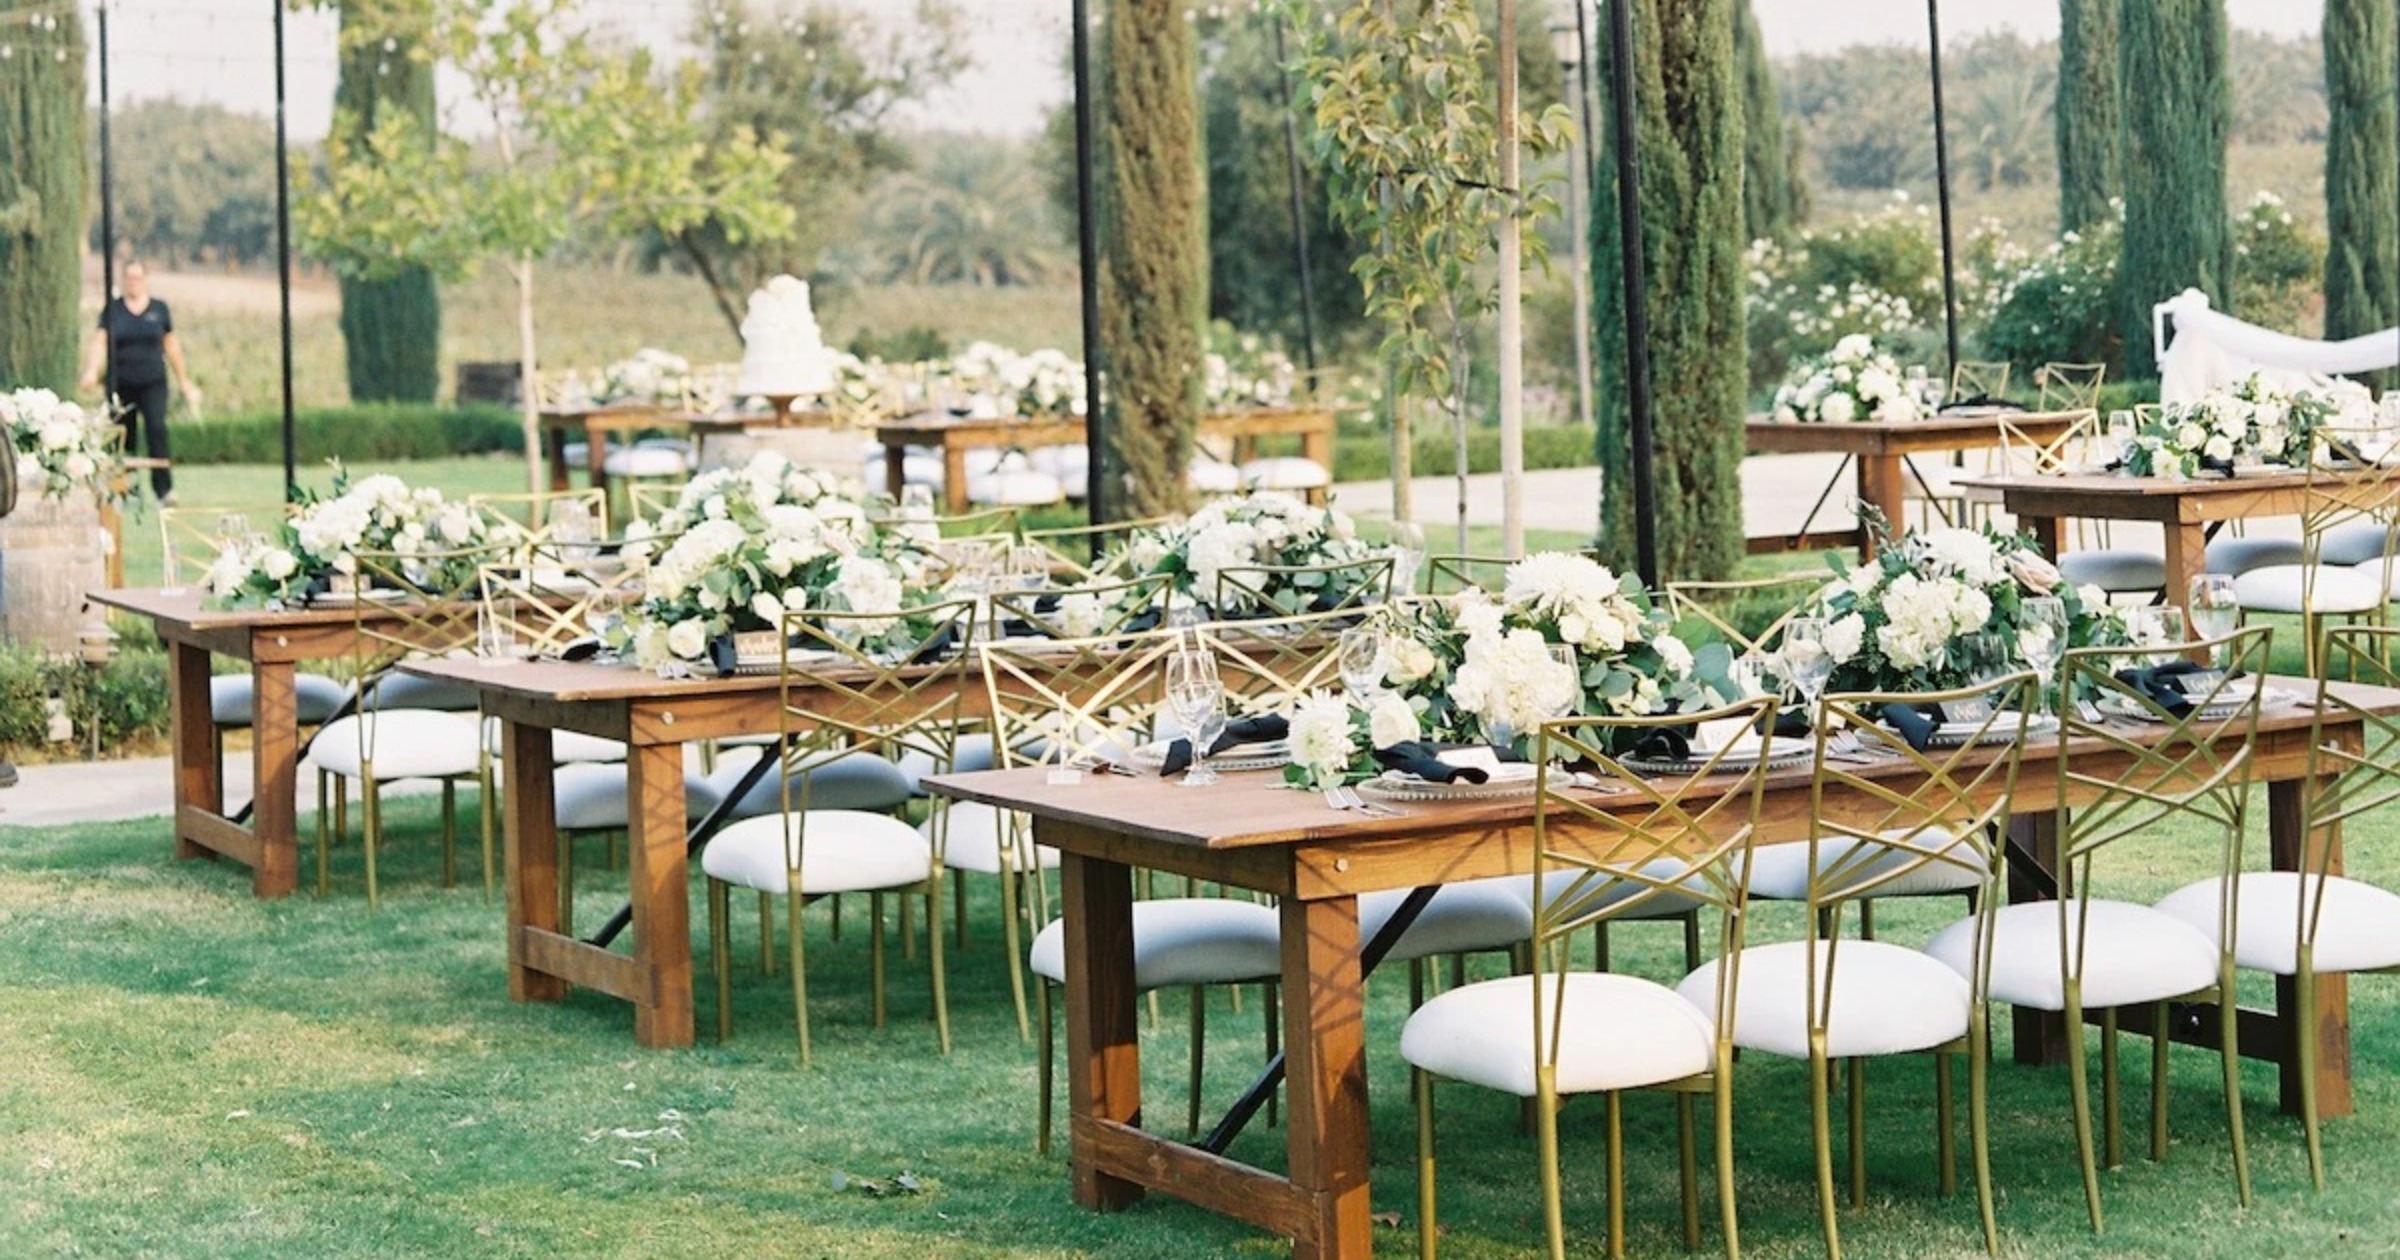 Vineyard wedding anyone? Here are a few that you should know about…